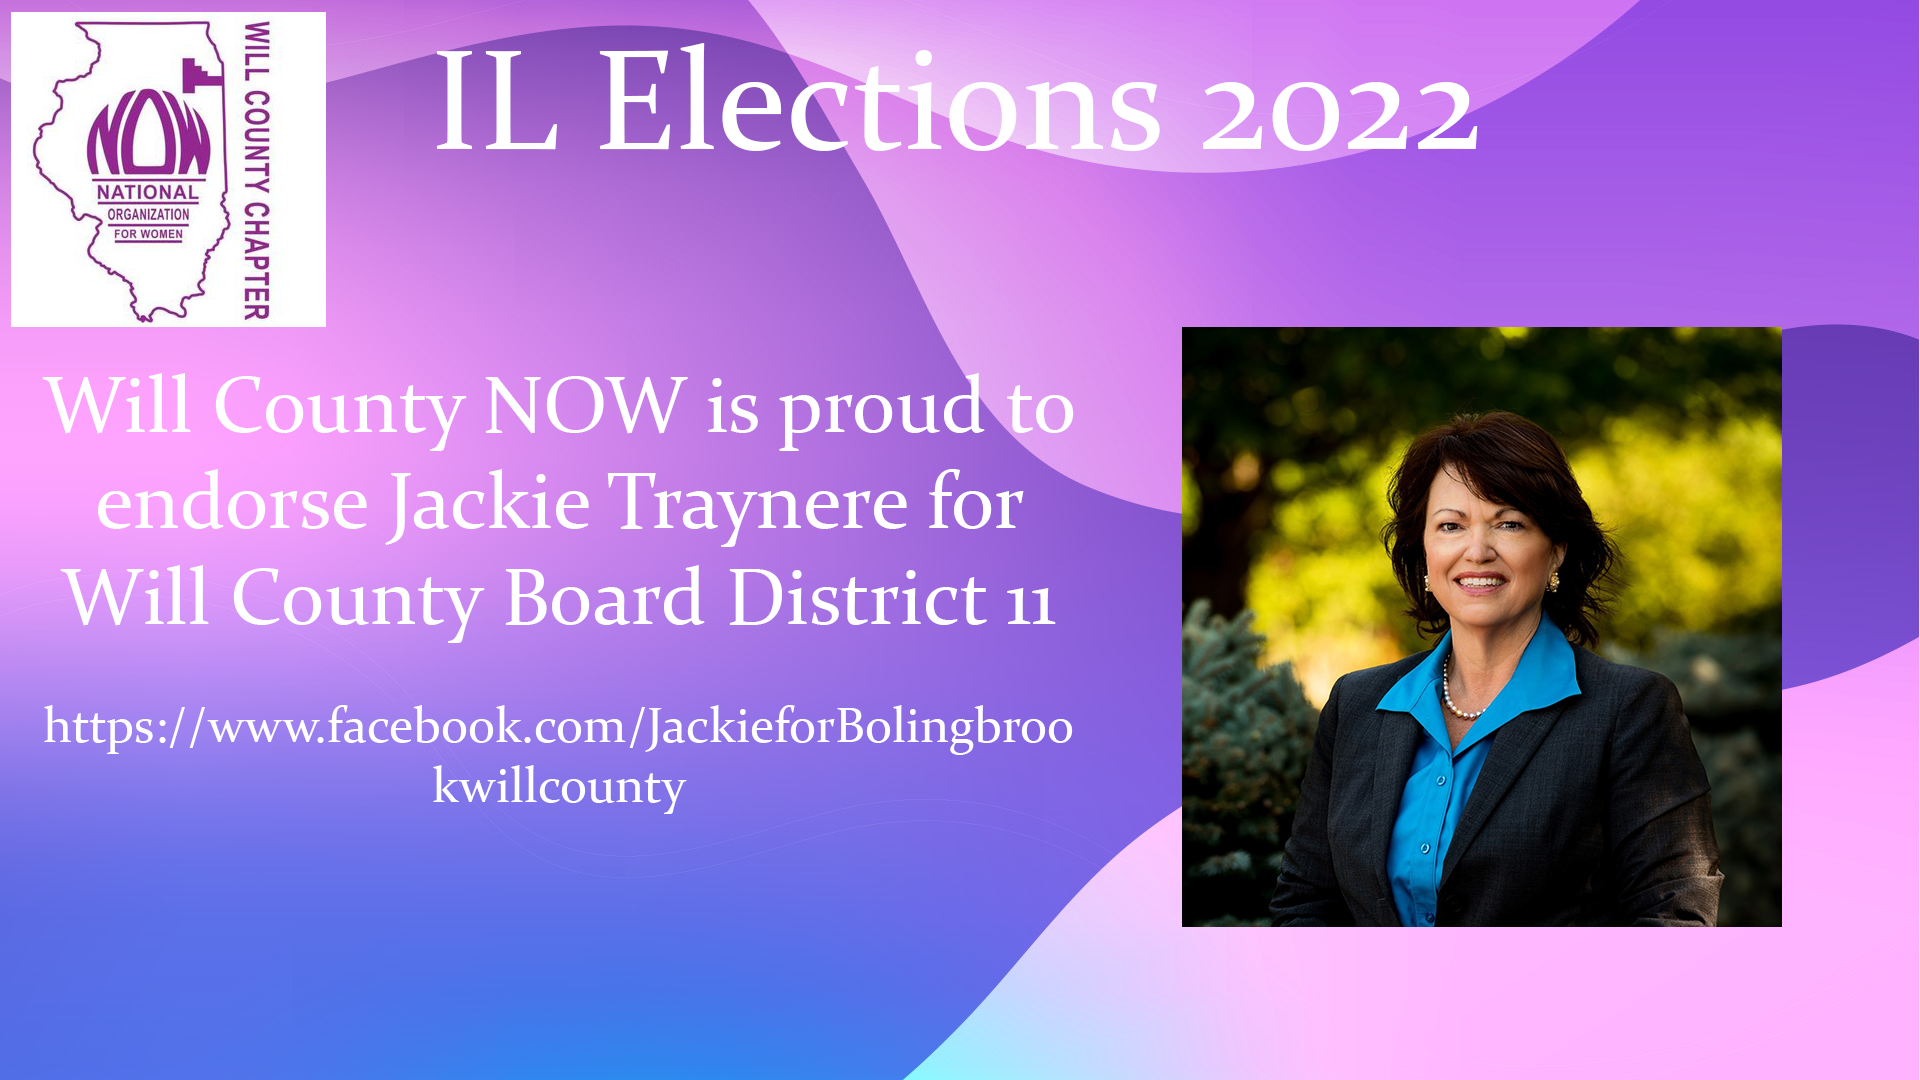 Will County NOW Endorses Jackie Traynere for Will County Board District 11